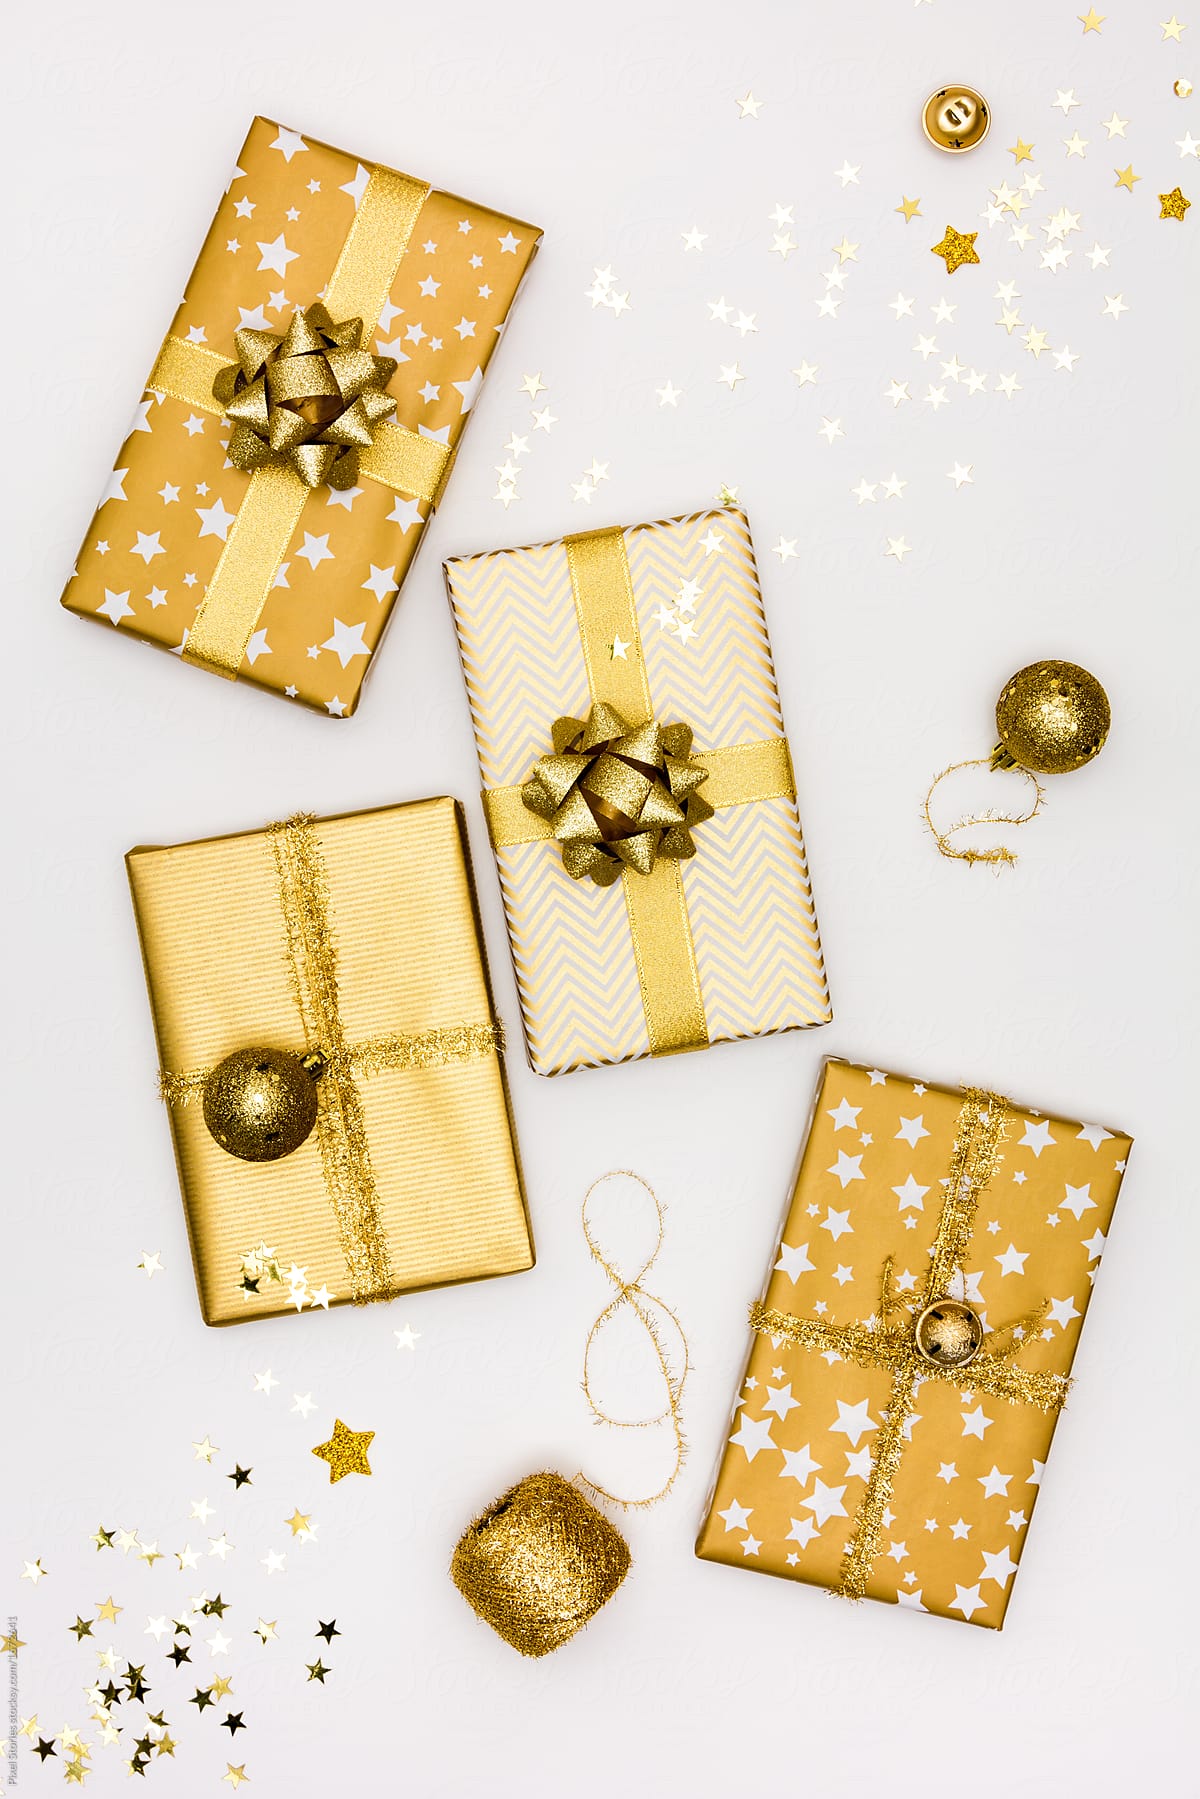 Golden themed handmade Christmas presents and gifts